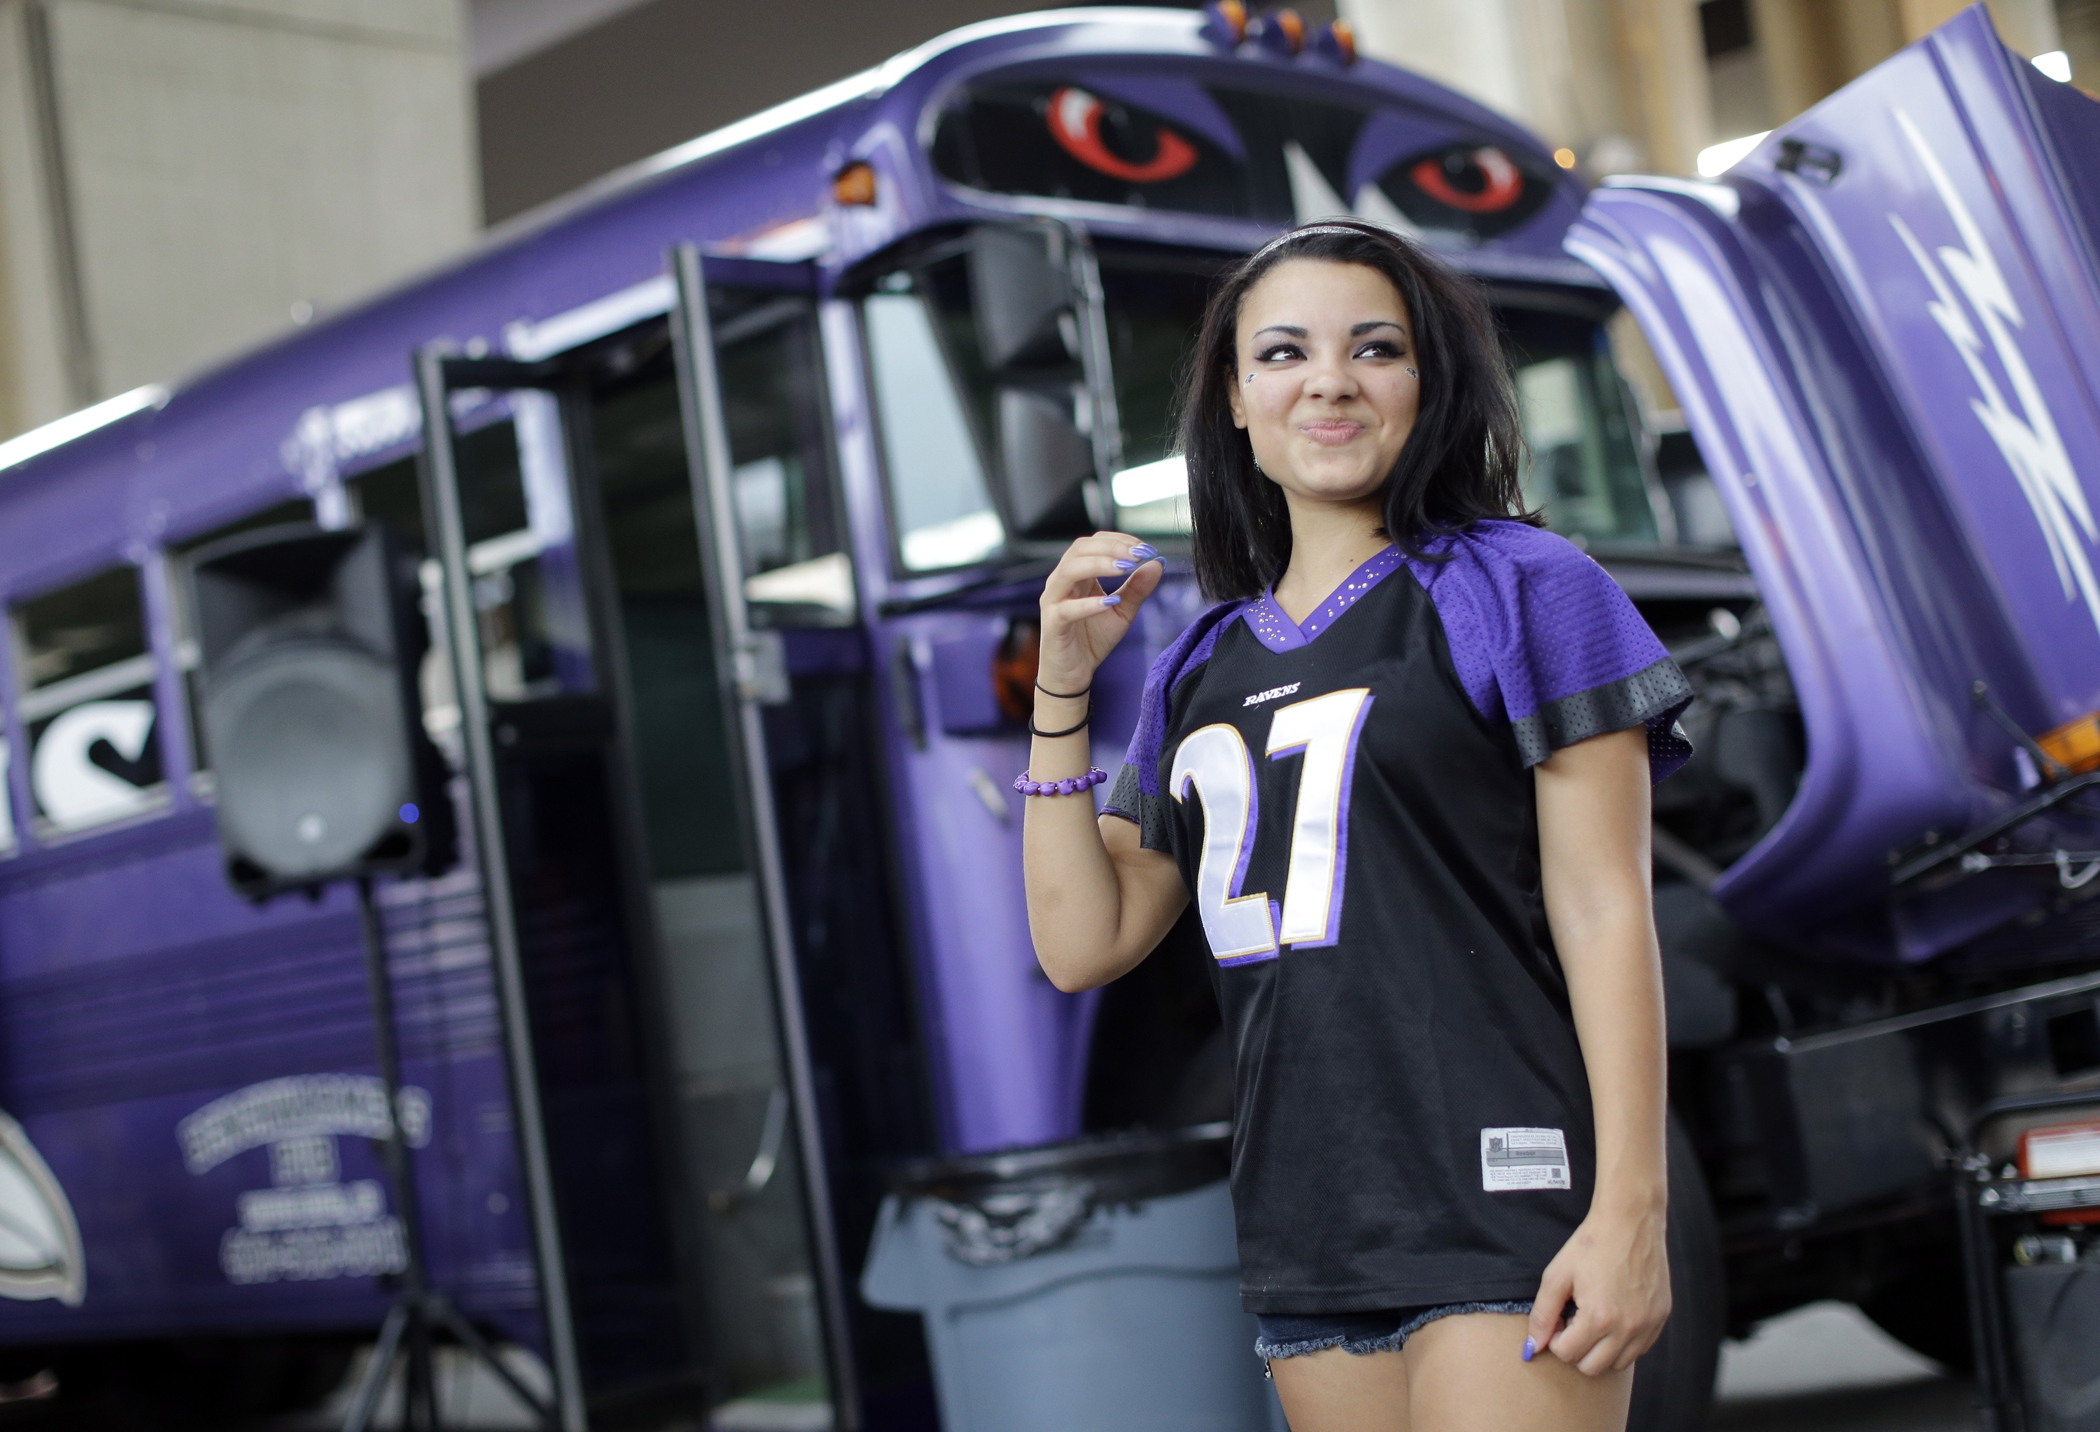 Racquel Bailey wears a Ray Rice jersey as she tailgates before the Baltimore Ravens' NFL football game against the Pittsburgh Steelers on Thursday, Sept. 11, 2014, in Baltimore.